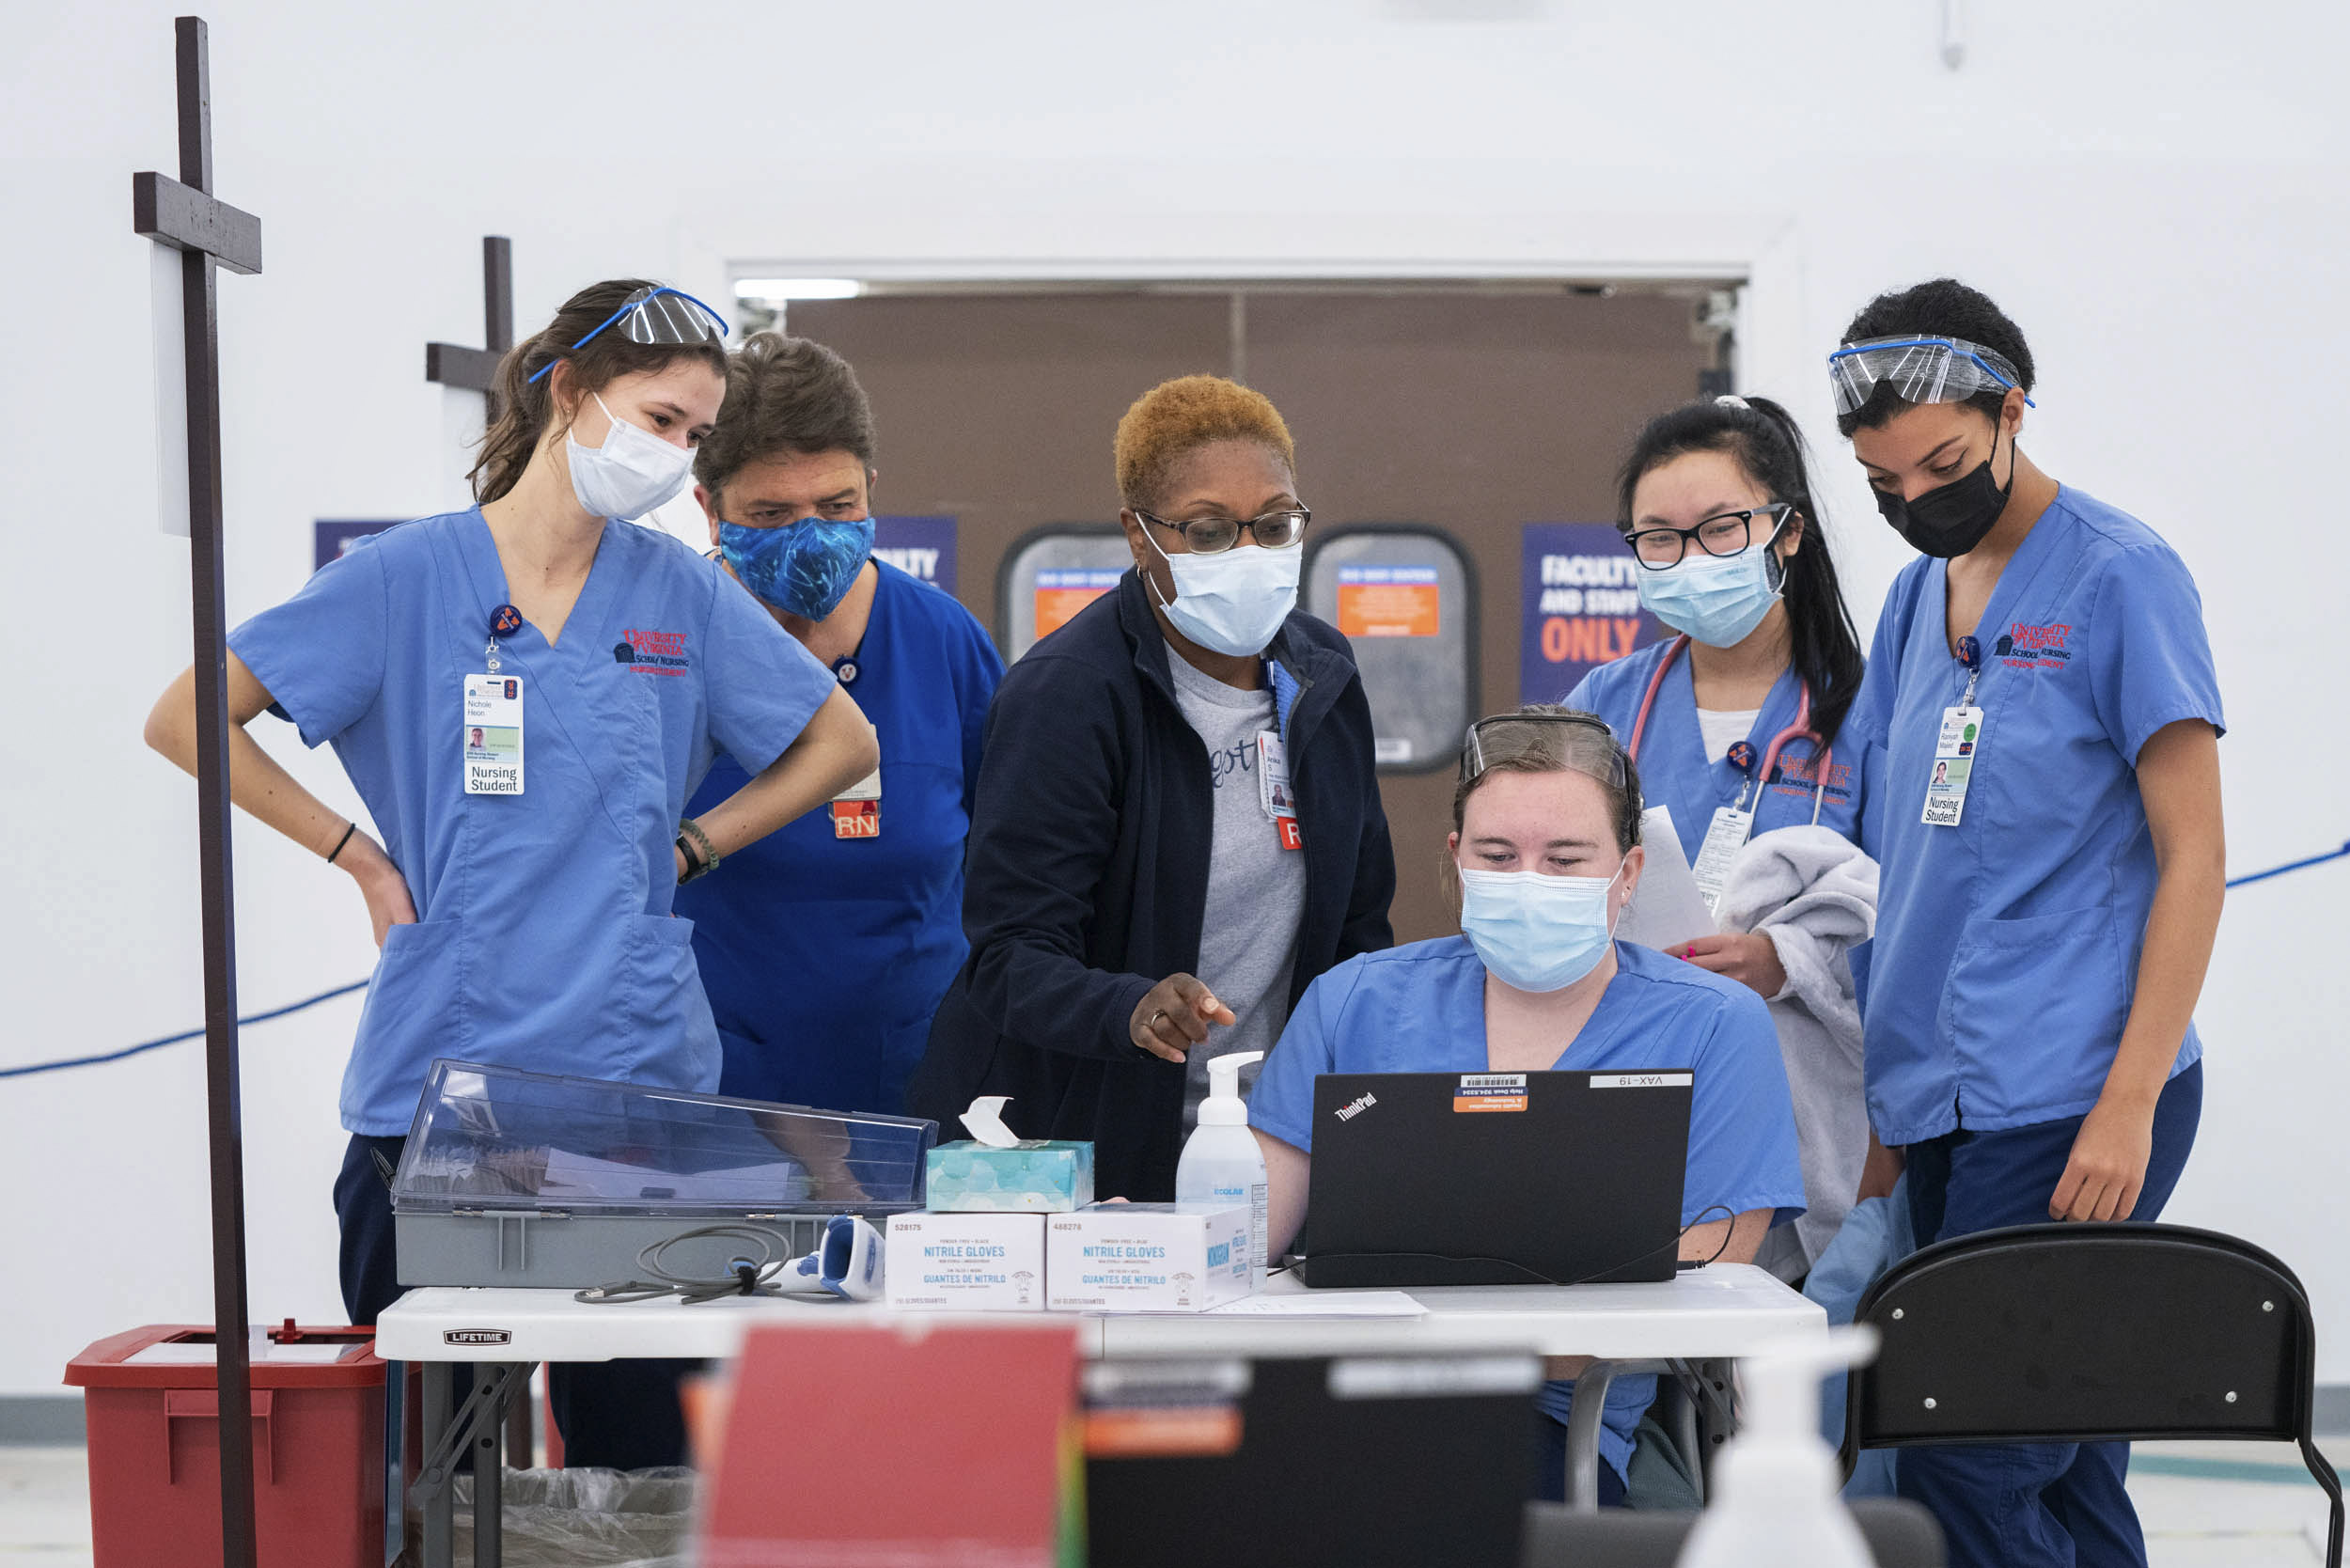 UVA Medical Students work with RN's on a computer at a covid vaccine clinic